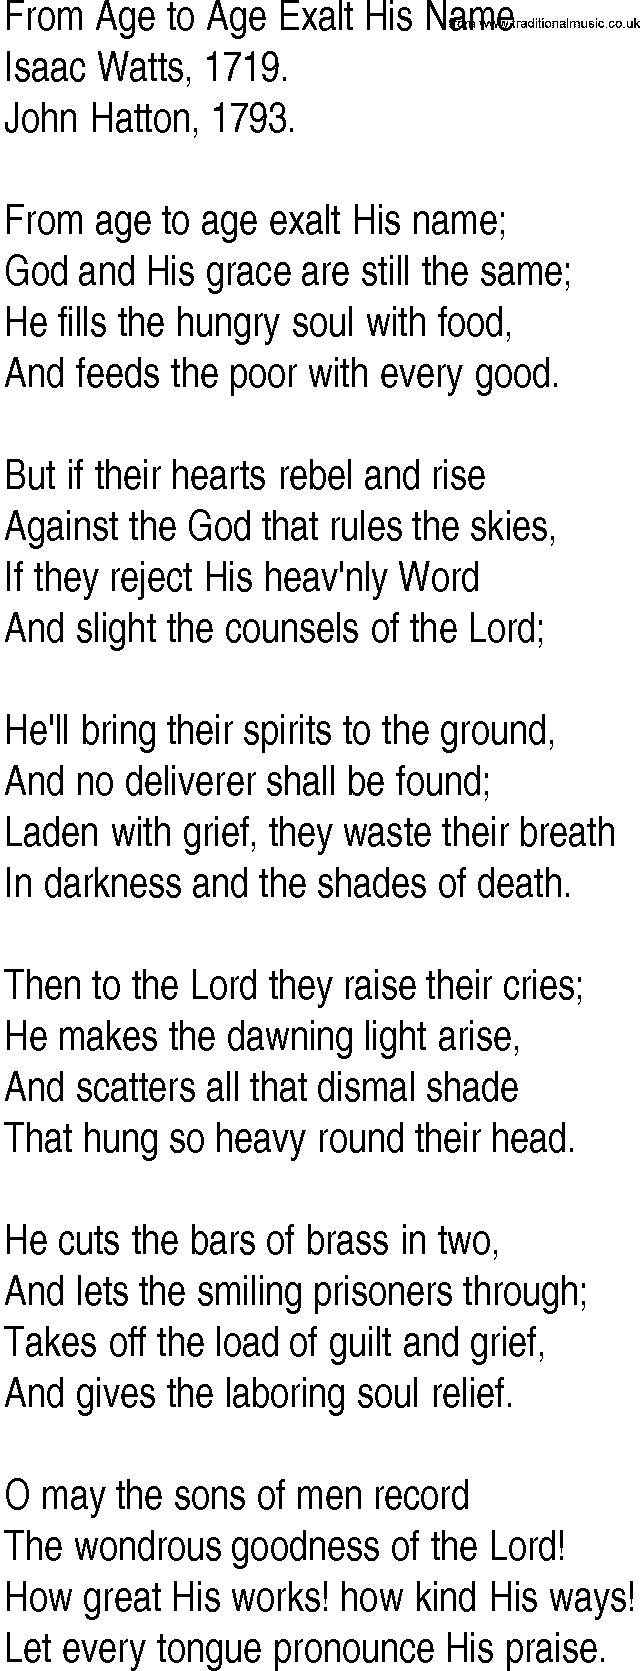 Hymn and Gospel Song: From Age to Age Exalt His Name by Isaac Watts lyrics